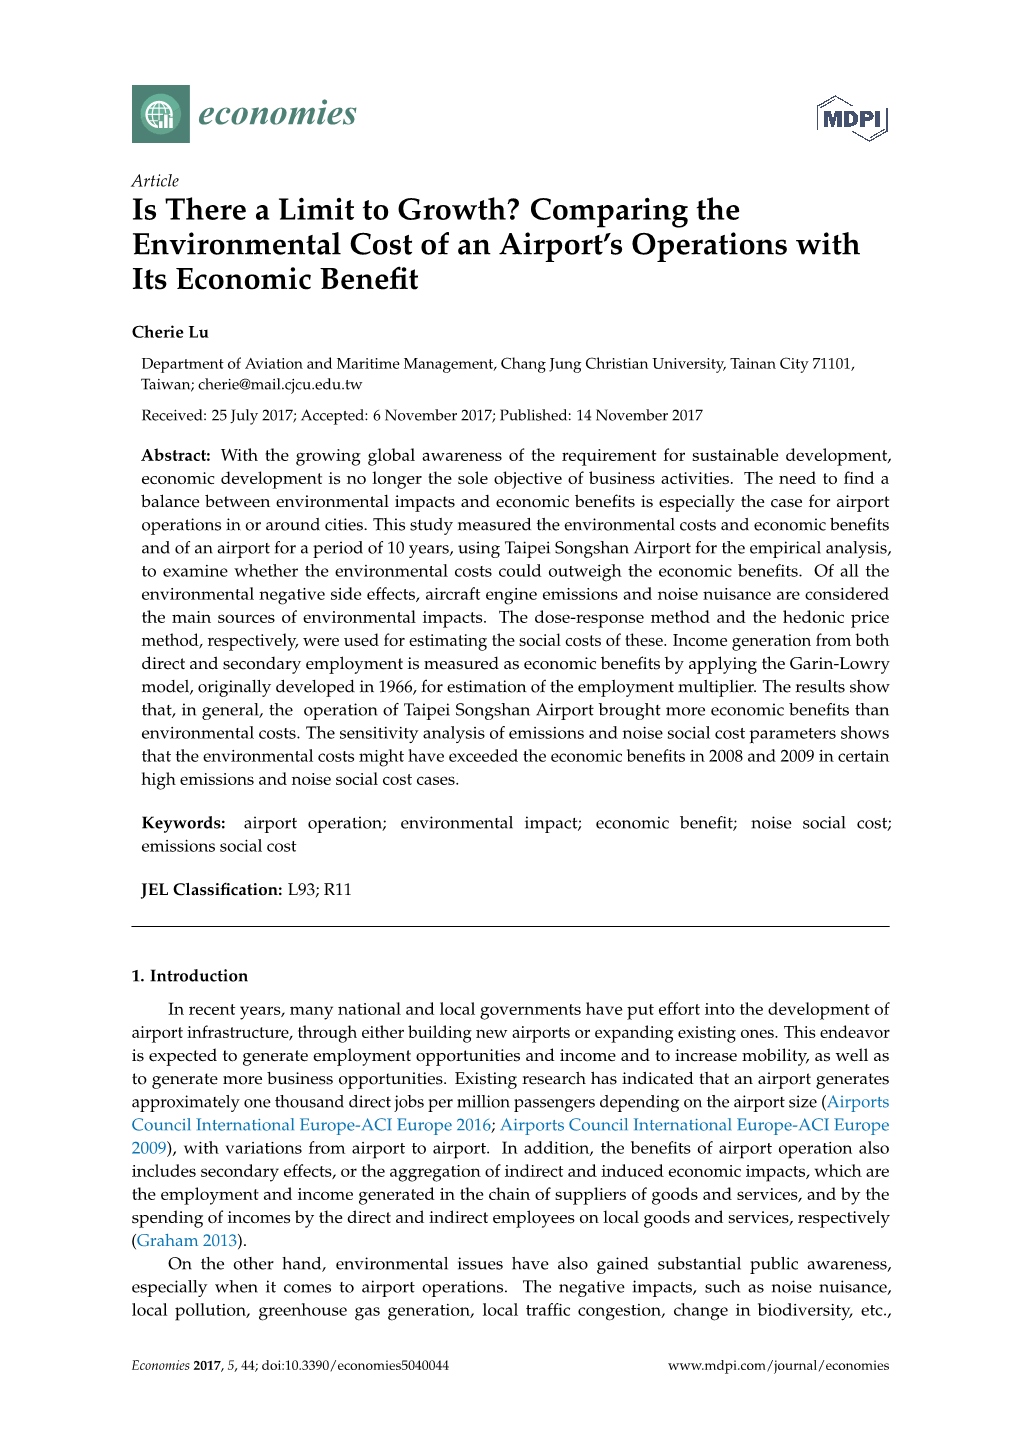 Comparing the Environmental Cost of an Airport's Operations With